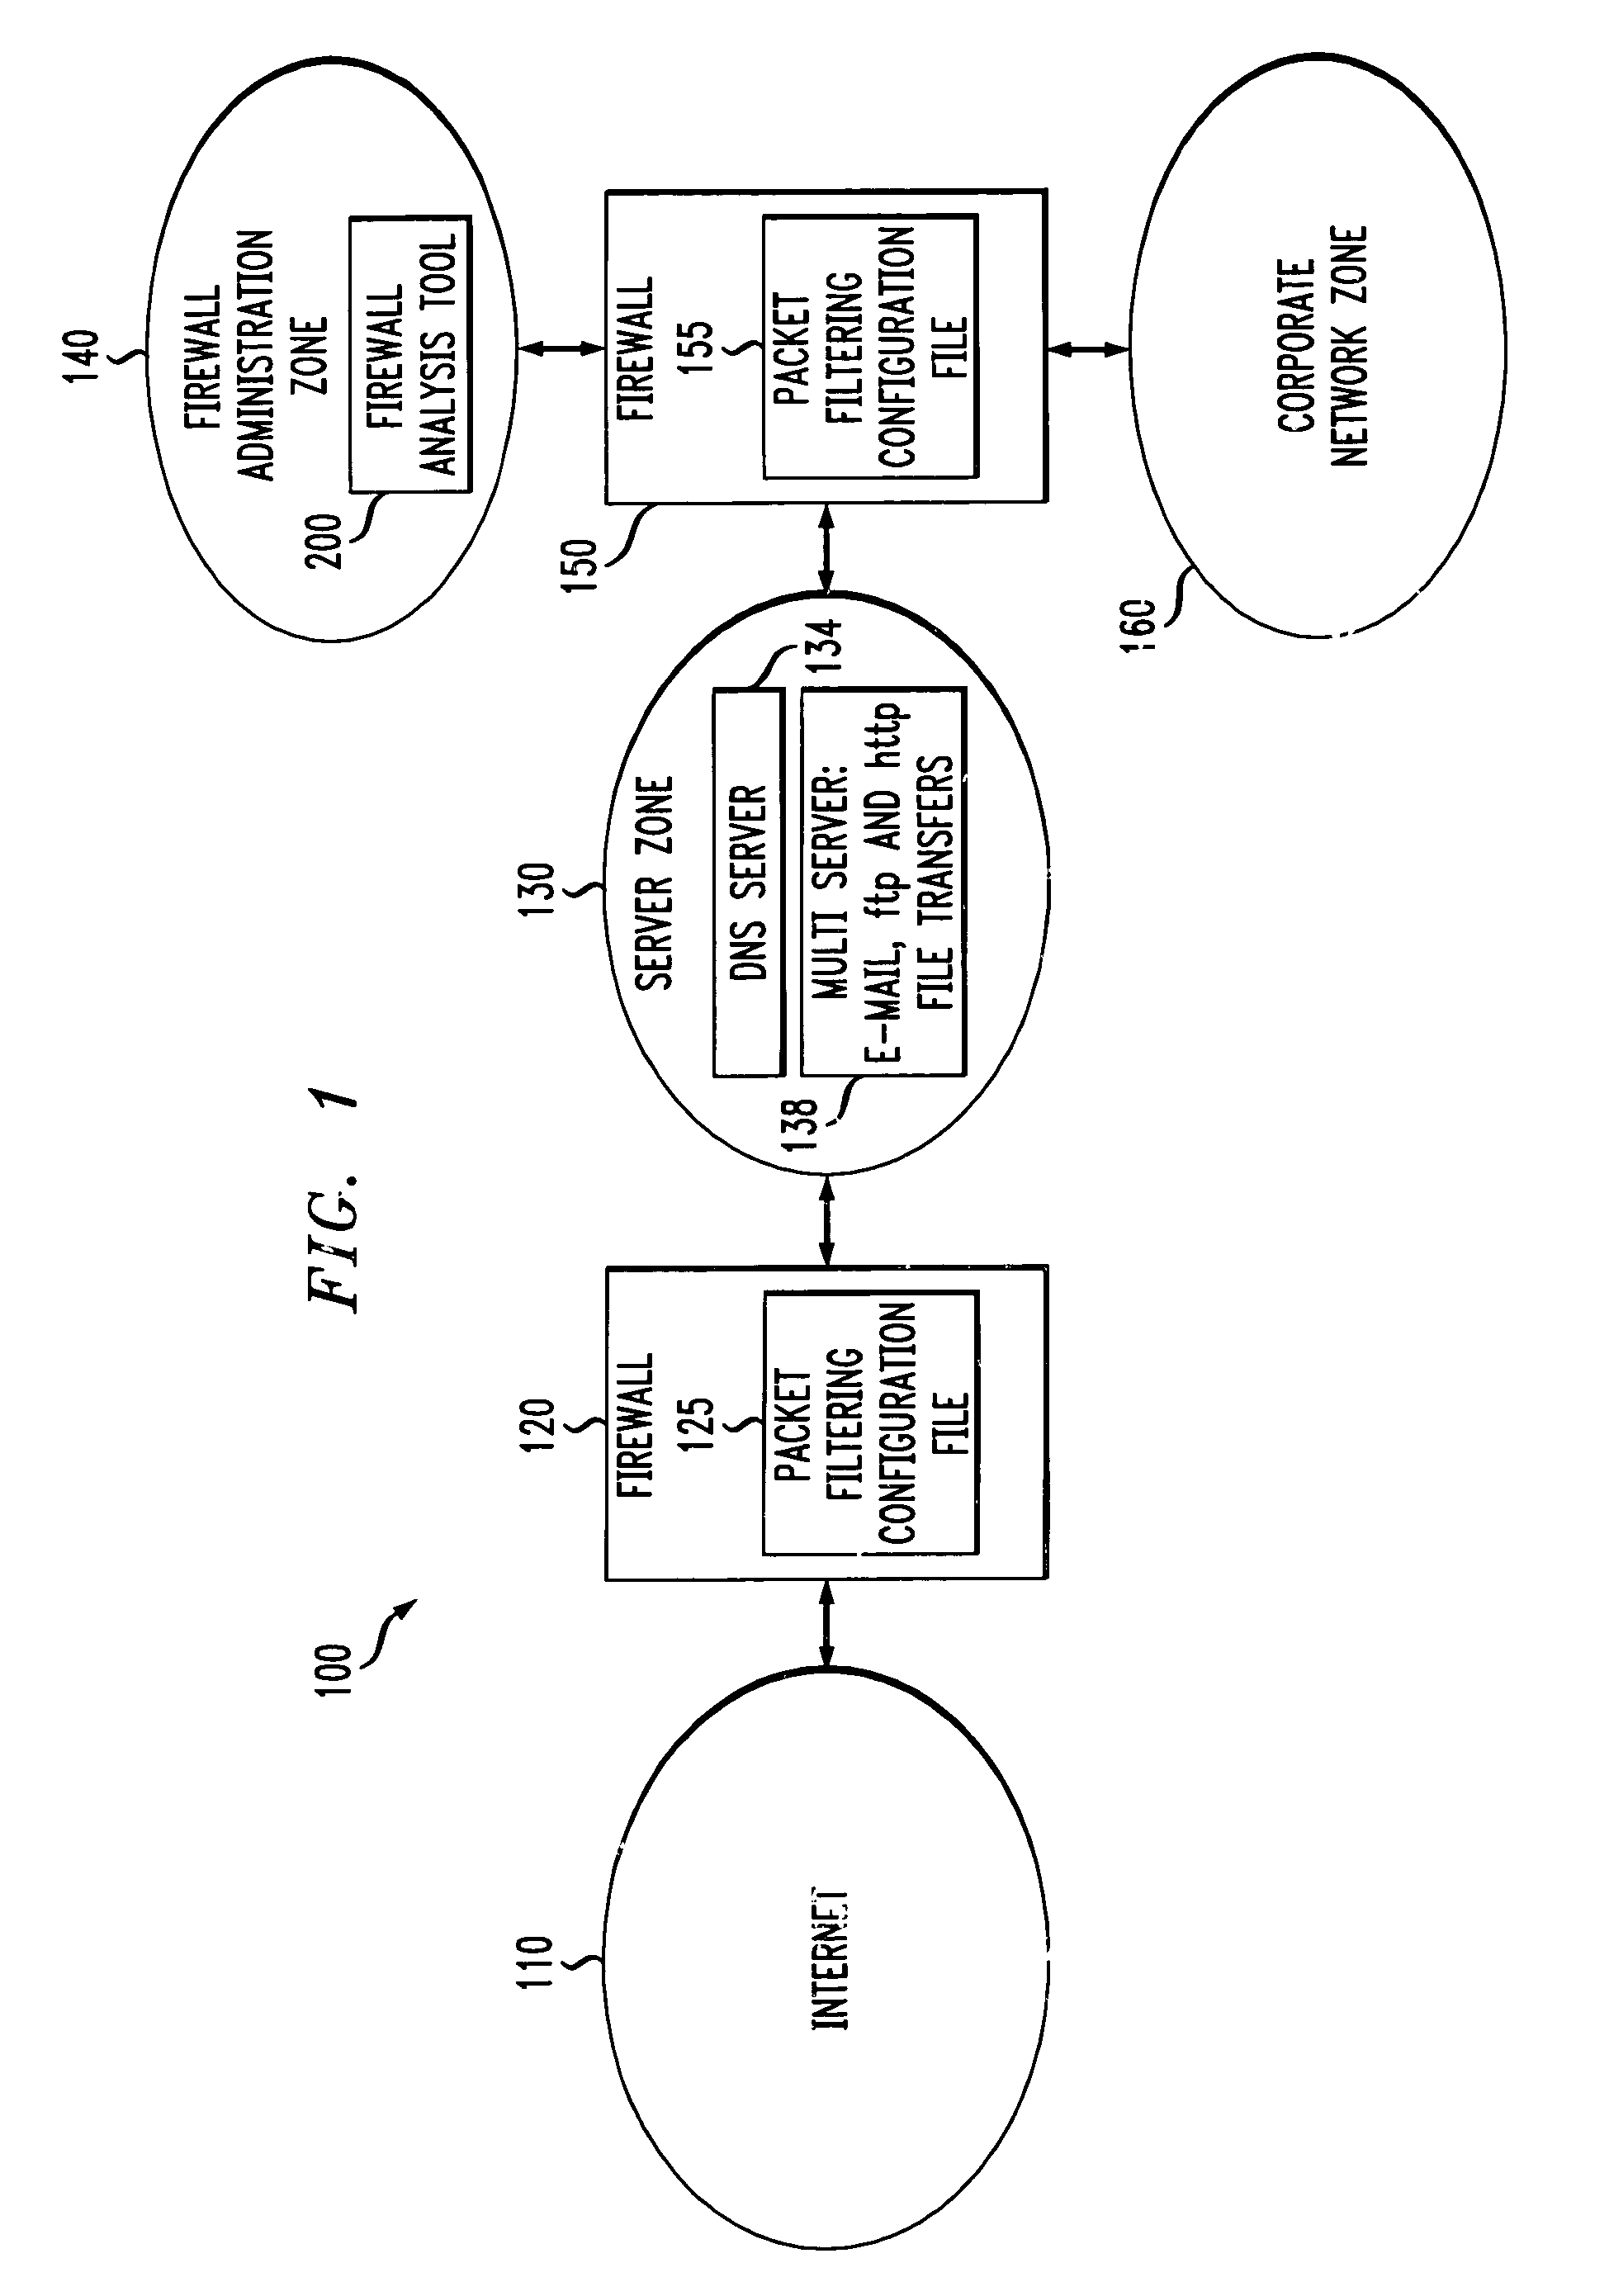 Method and apparatus for analyzing one or more firewalls